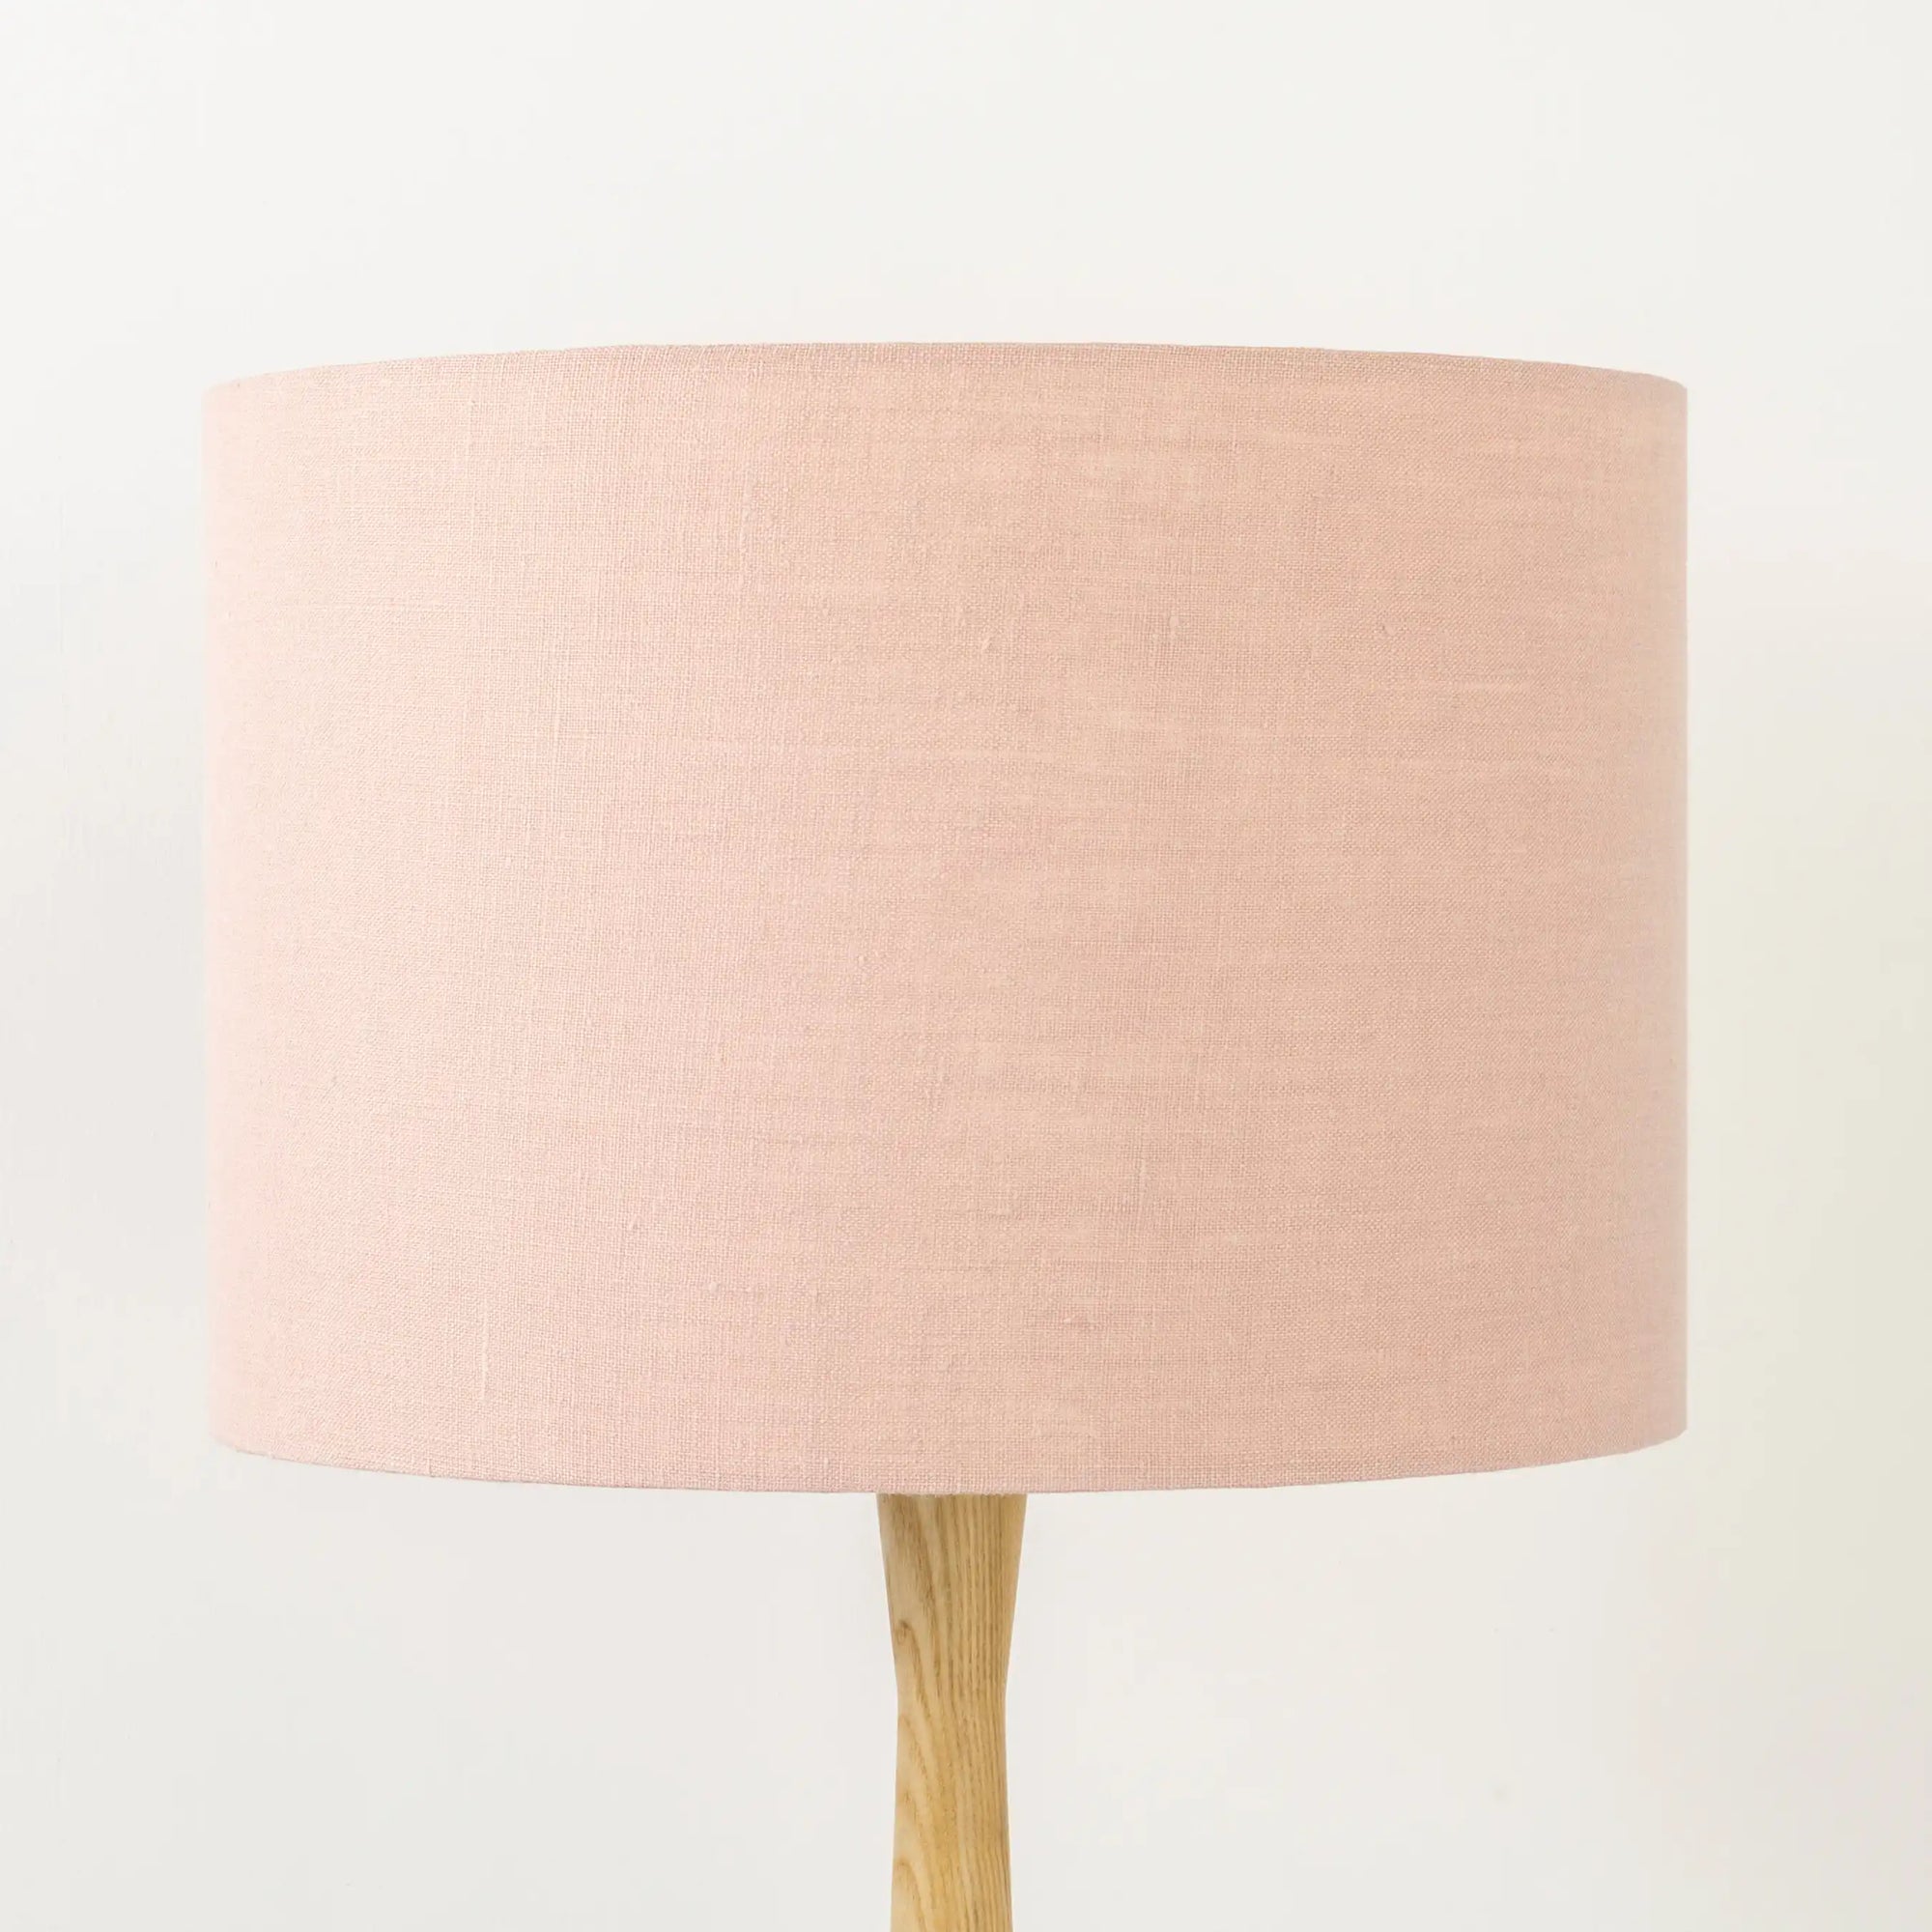 Blush pink lampshade on wooden table base